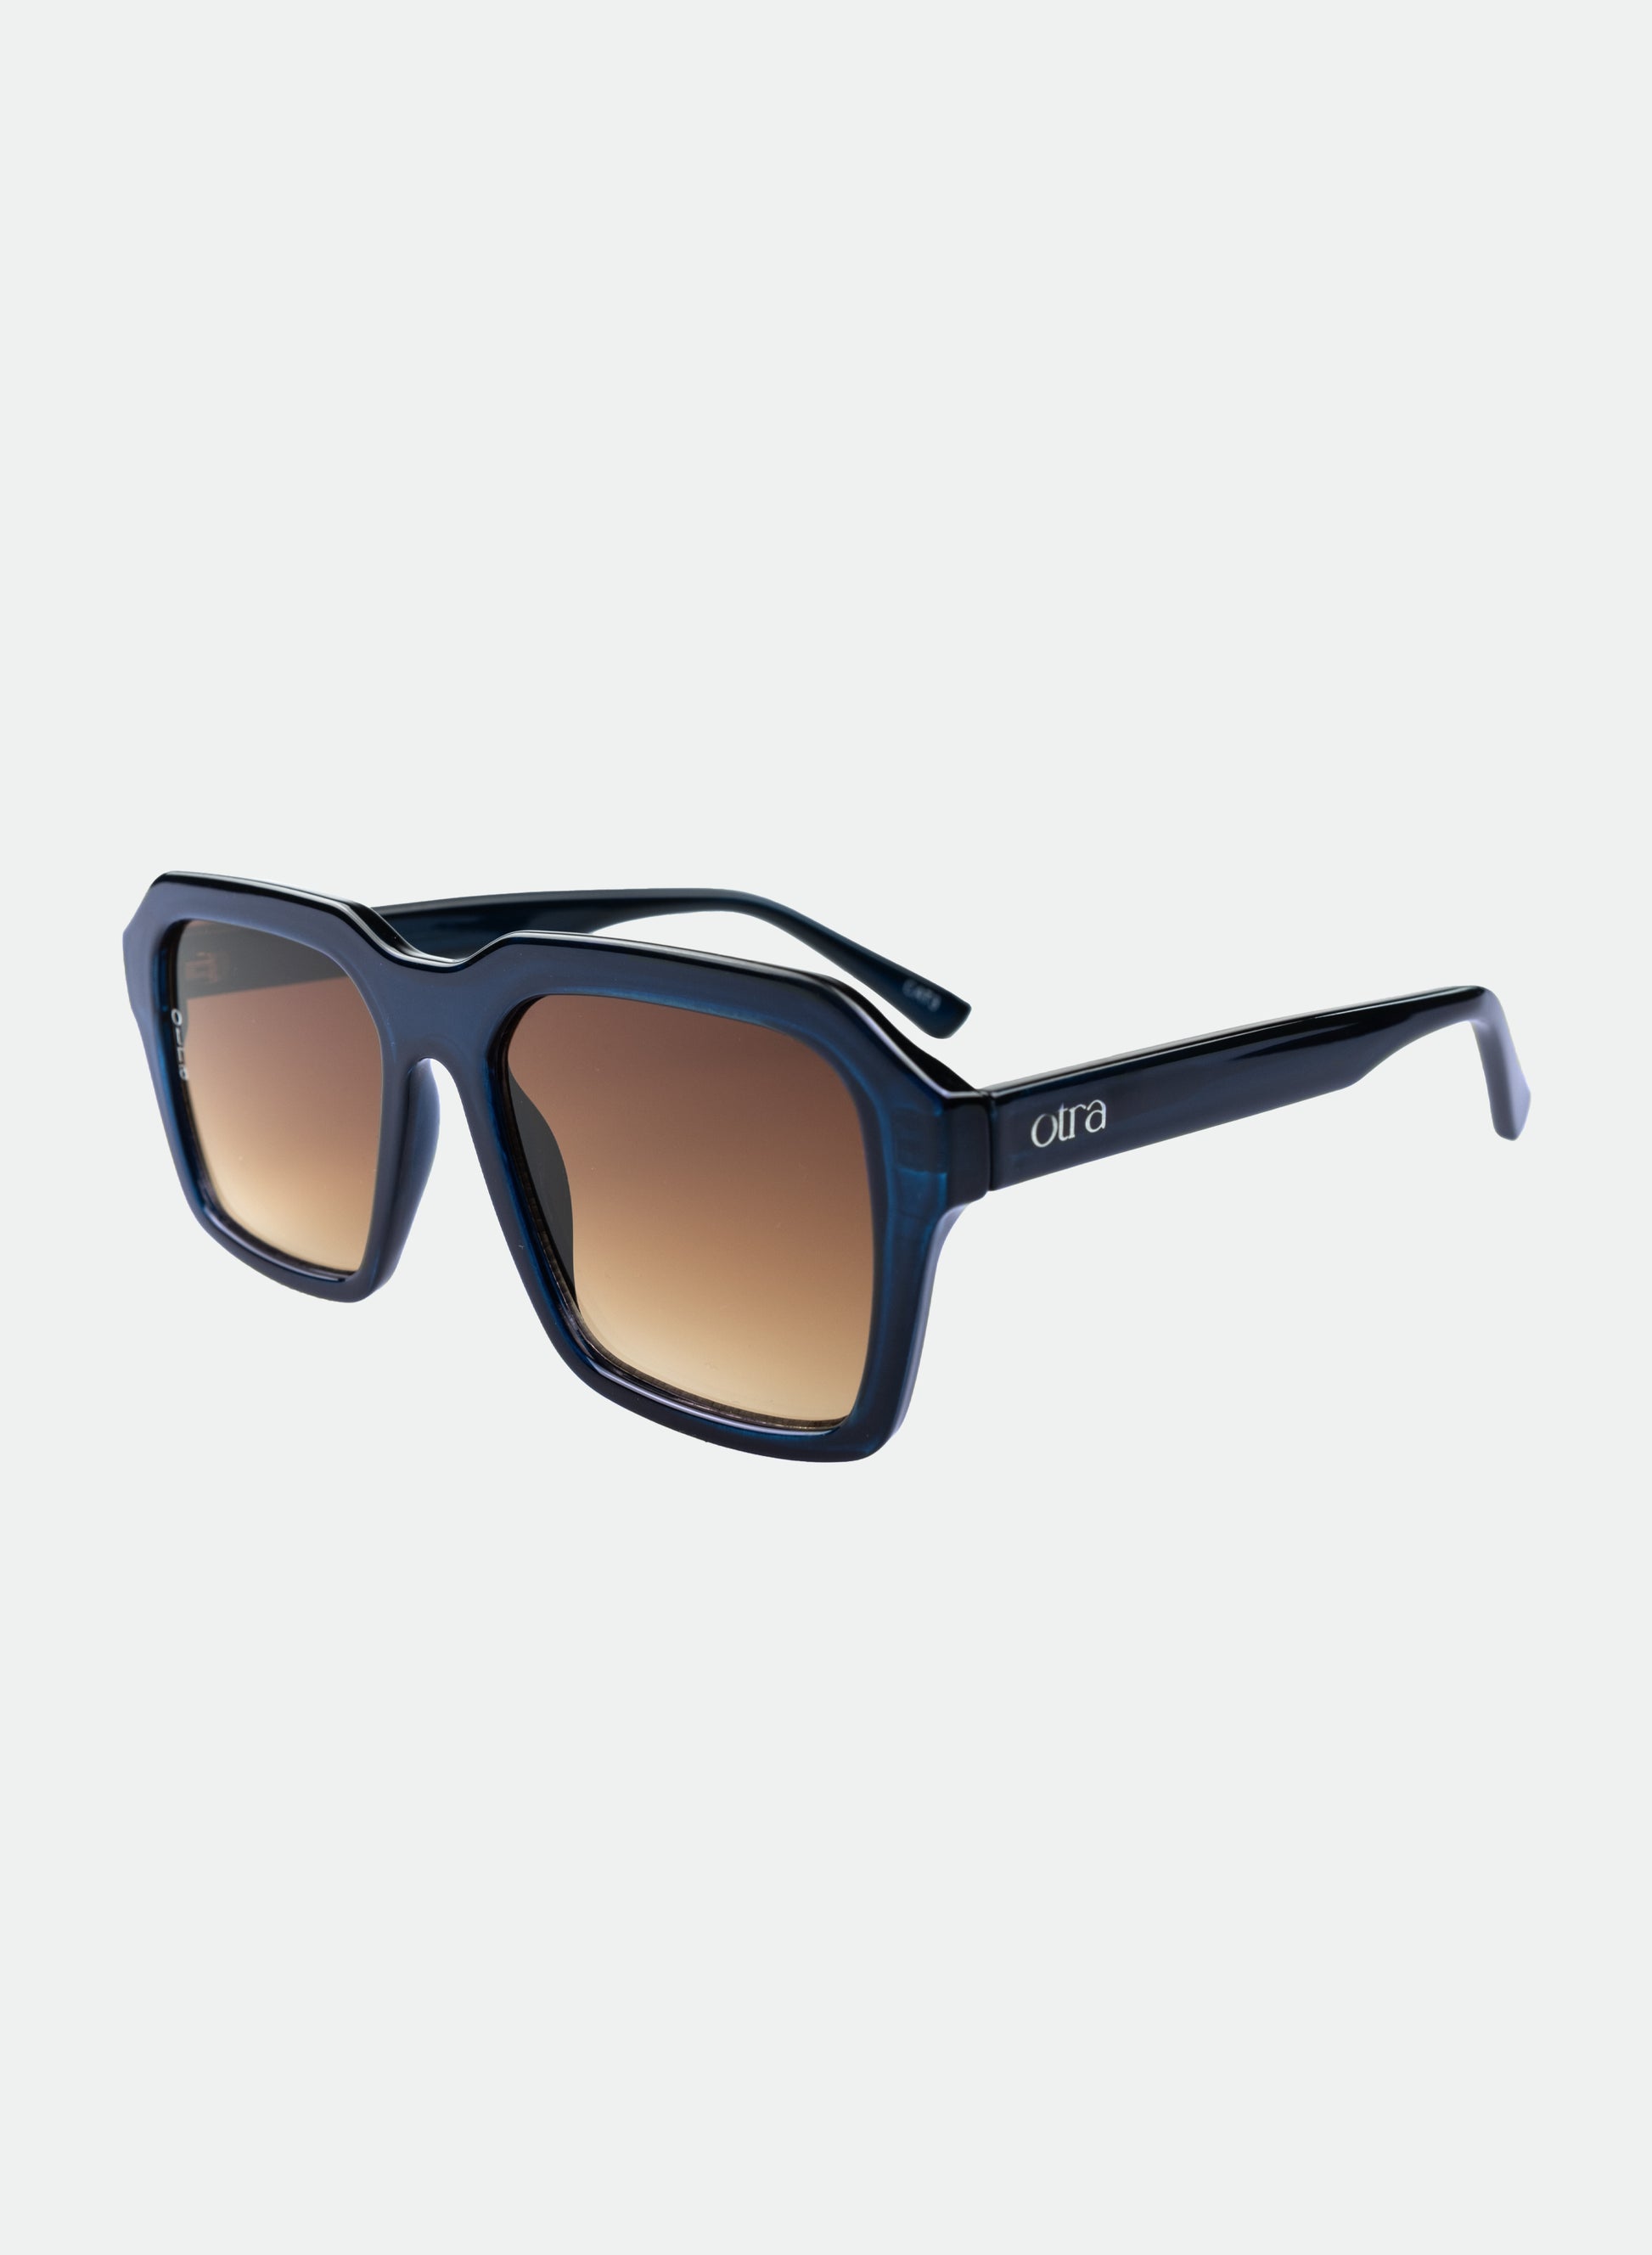 Lennox sunglasses in navy side view